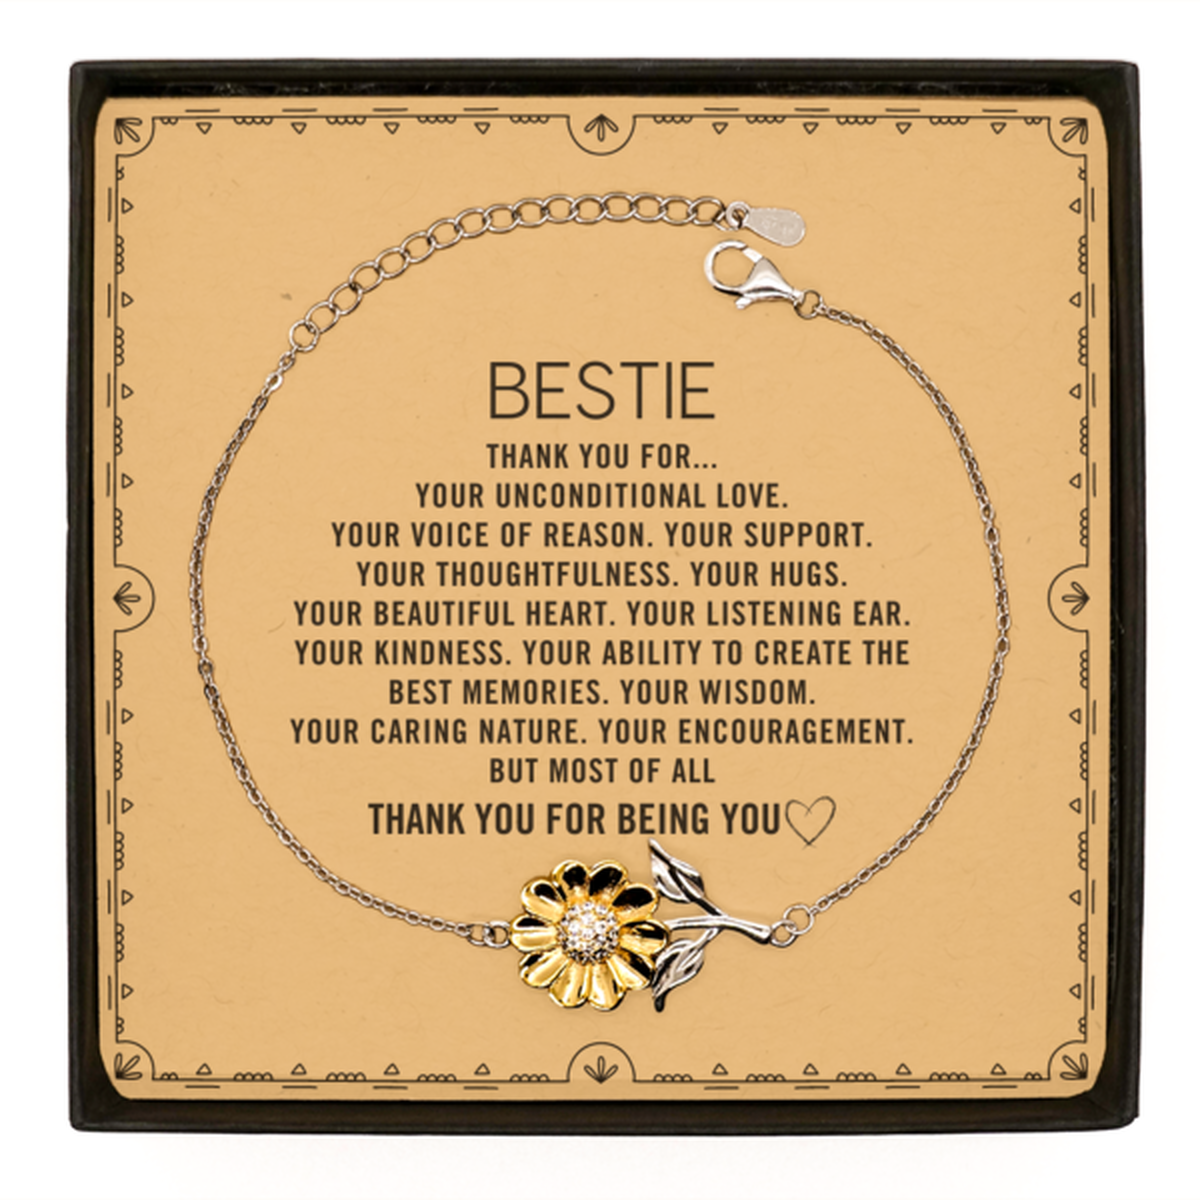 Bestie Sunflower Bracelet Custom, Message Card Gifts For Bestie Christmas Graduation Birthday Gifts for Men Women Bestie Thank you for Your unconditional love